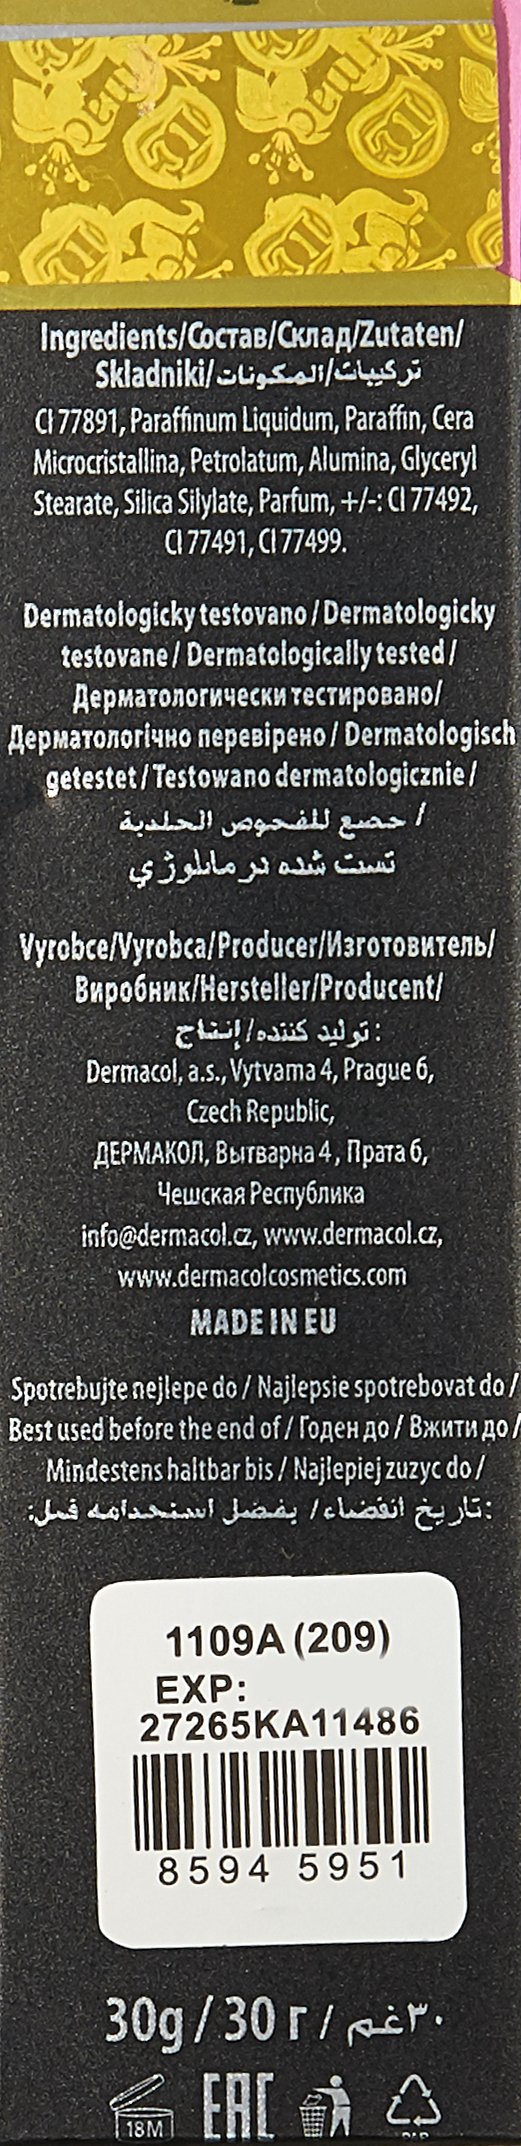 Dermacol Make-Up Cover Waterproof Hypoallergenic for All Skin Types